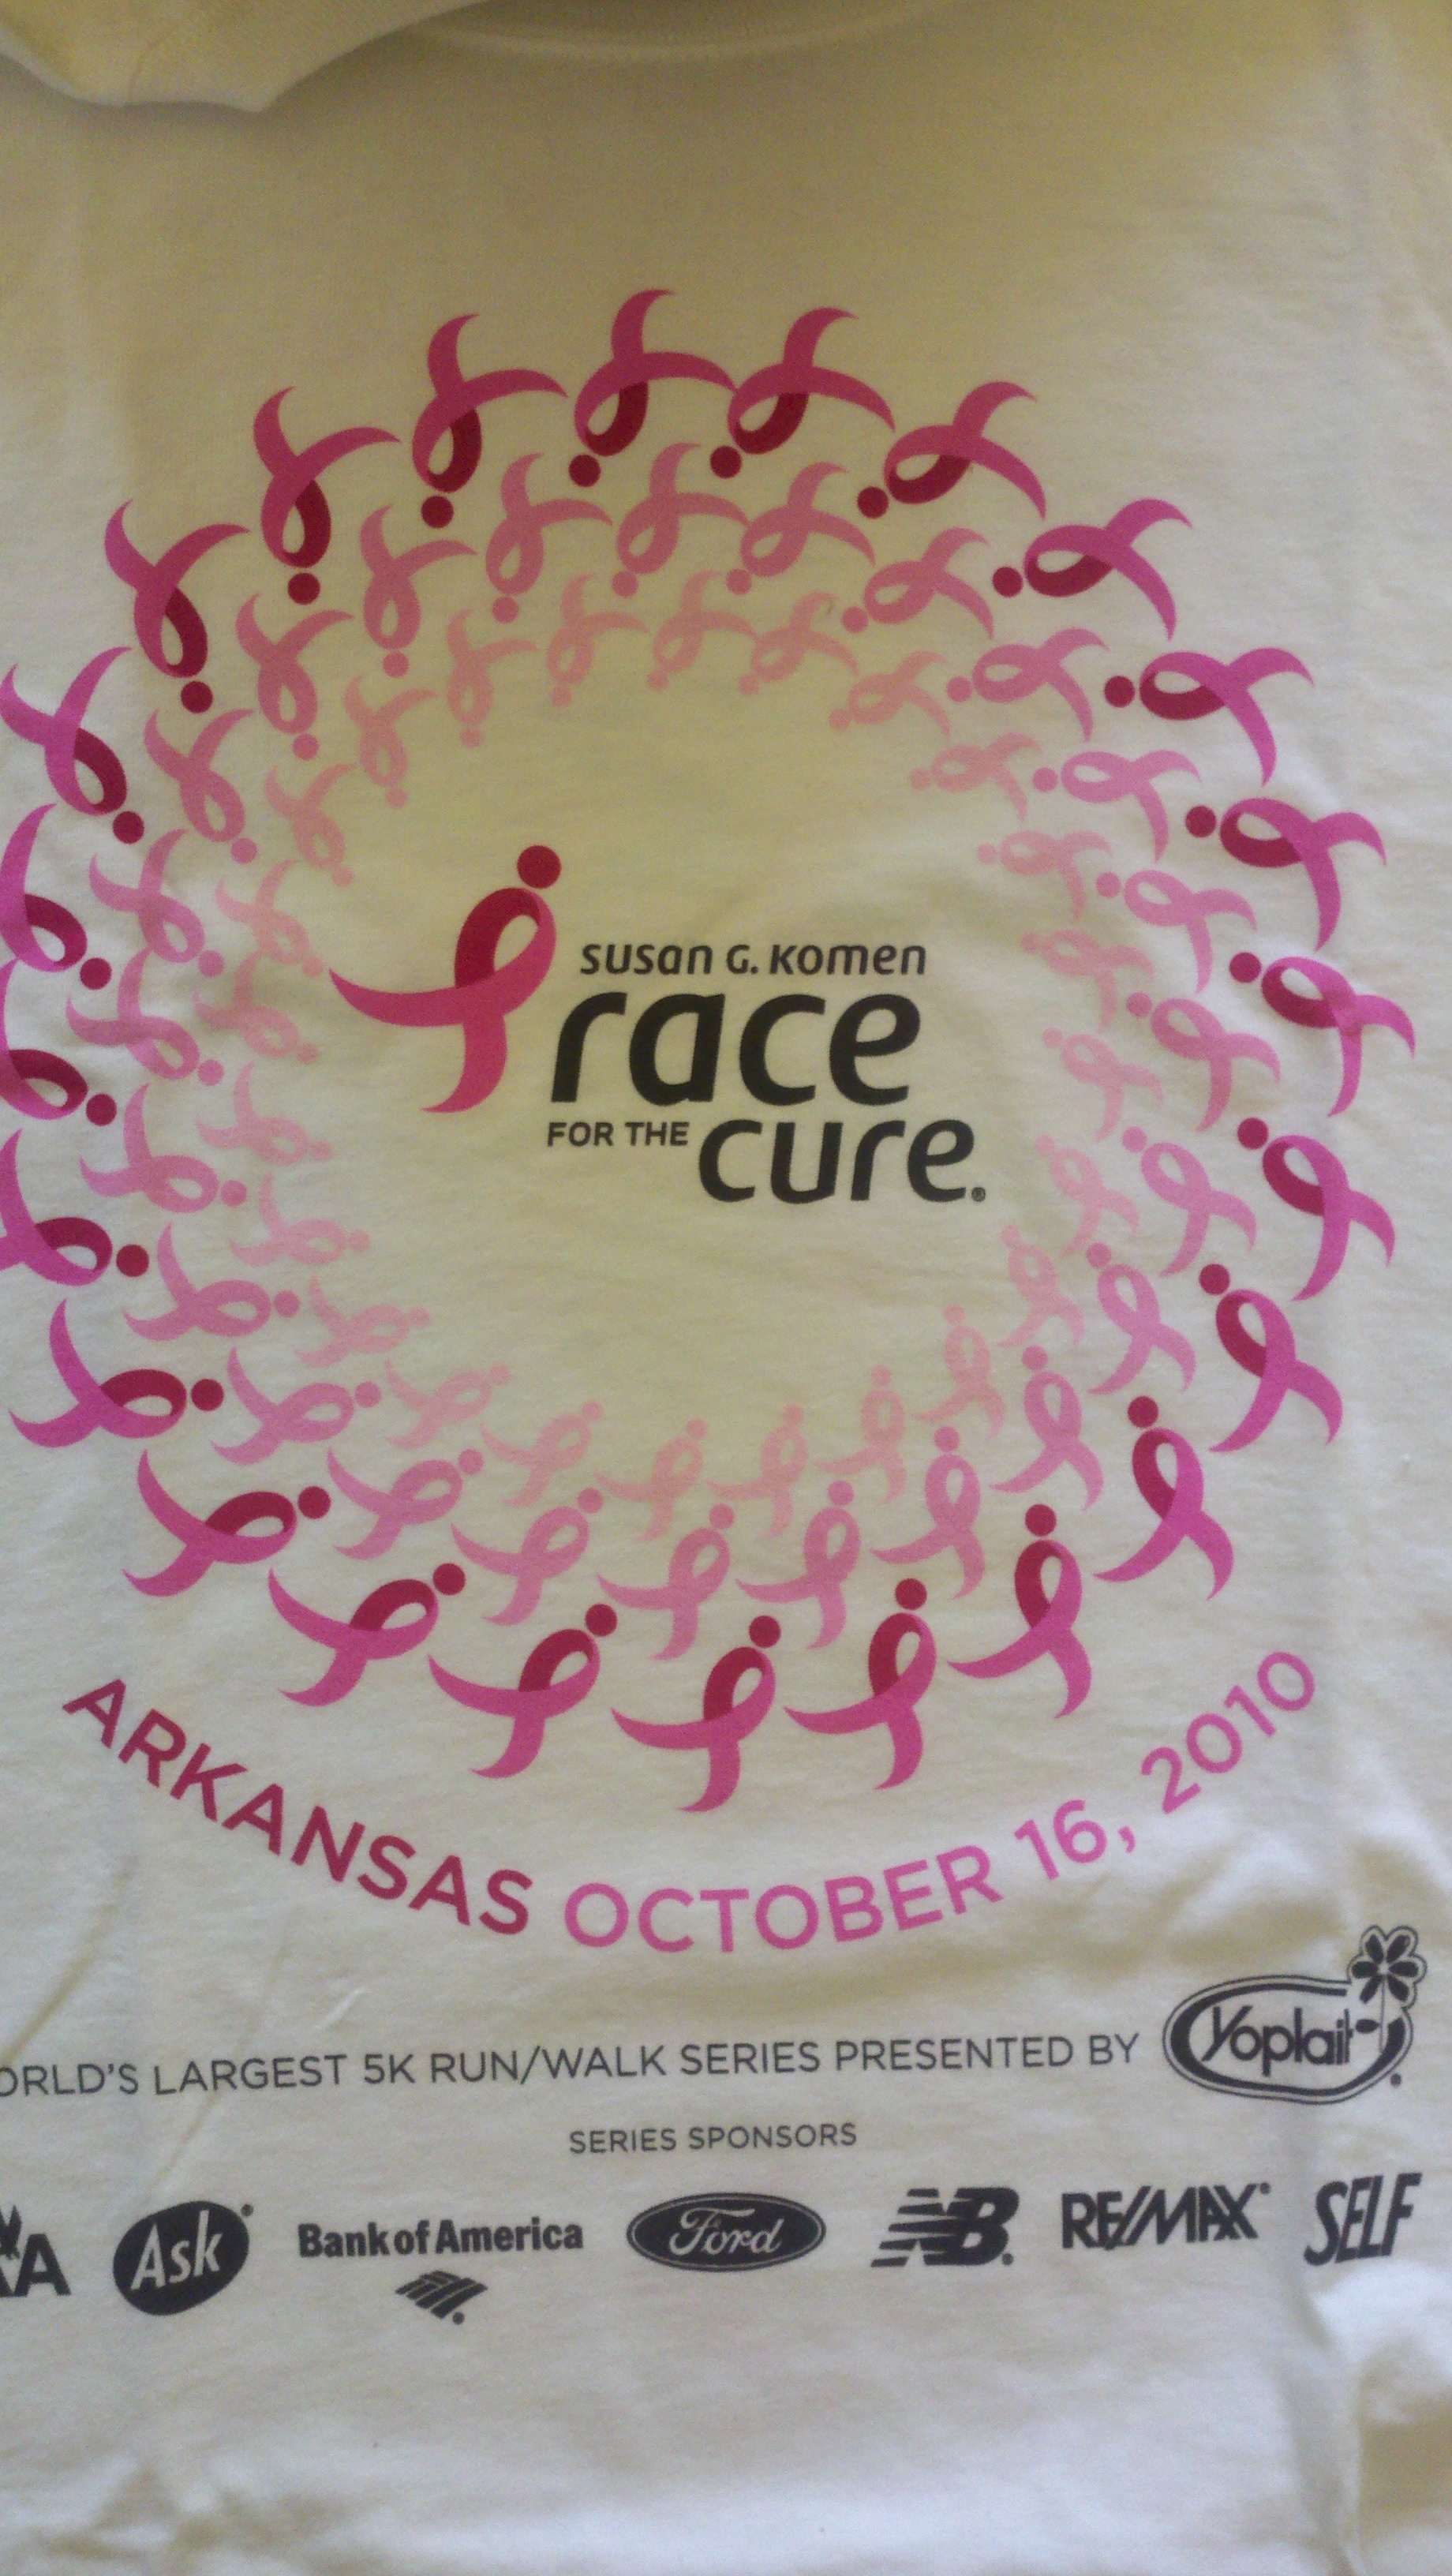 Race for the Cure 2010 – Get your pink on!